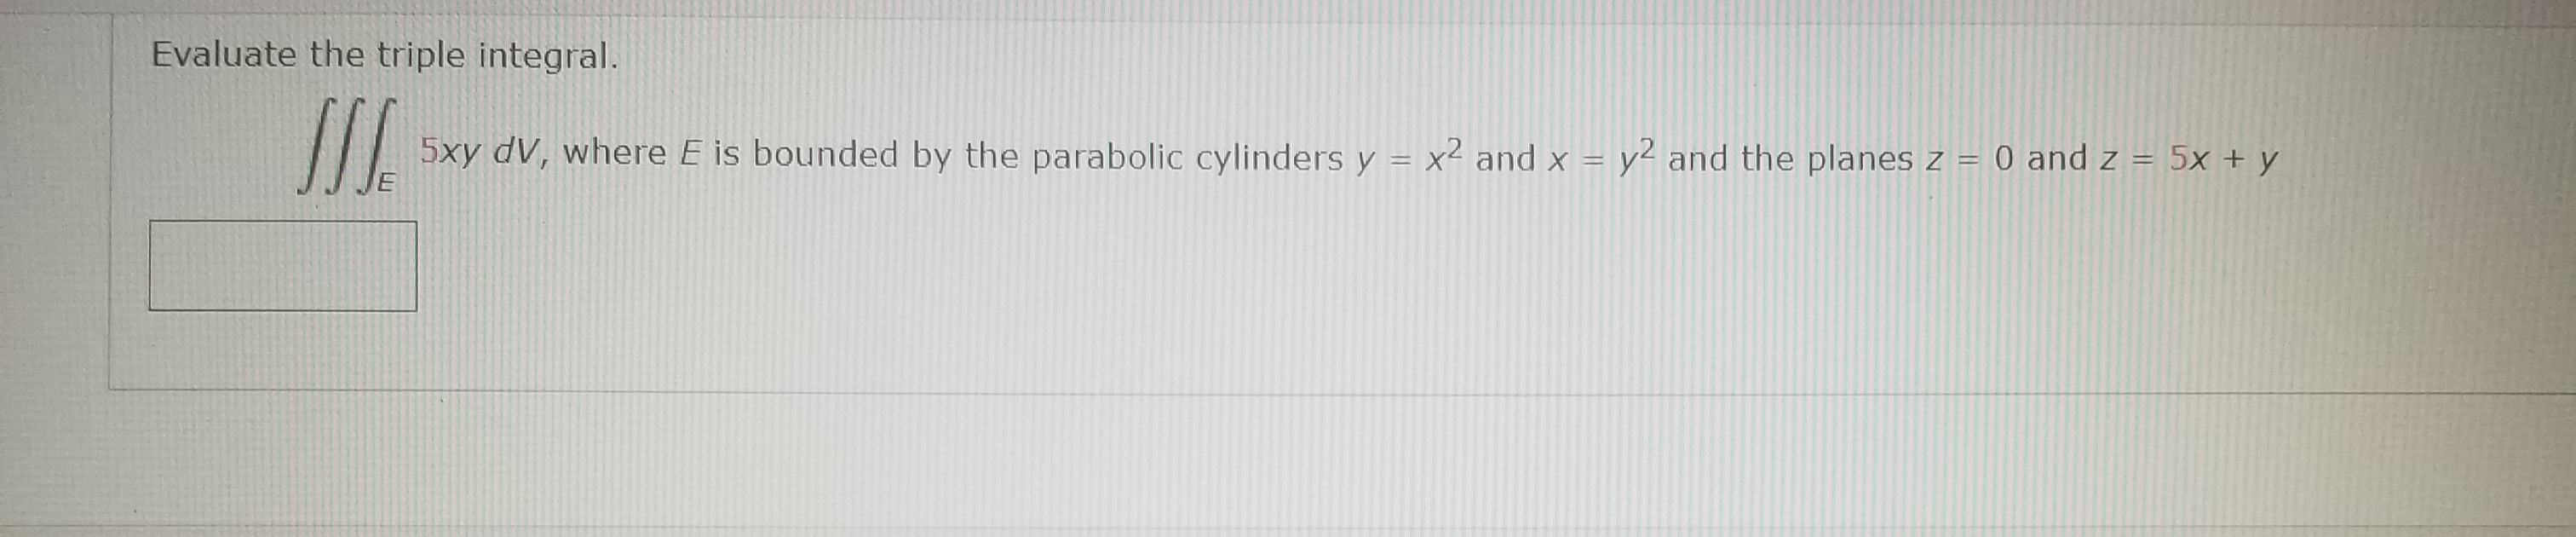 Evaluate the triple integral.
5xy dV, where E is bounded by the parabolic cylinders y = x² and x = y2 and the planes z = 0 and z = 5x + y
%3D
